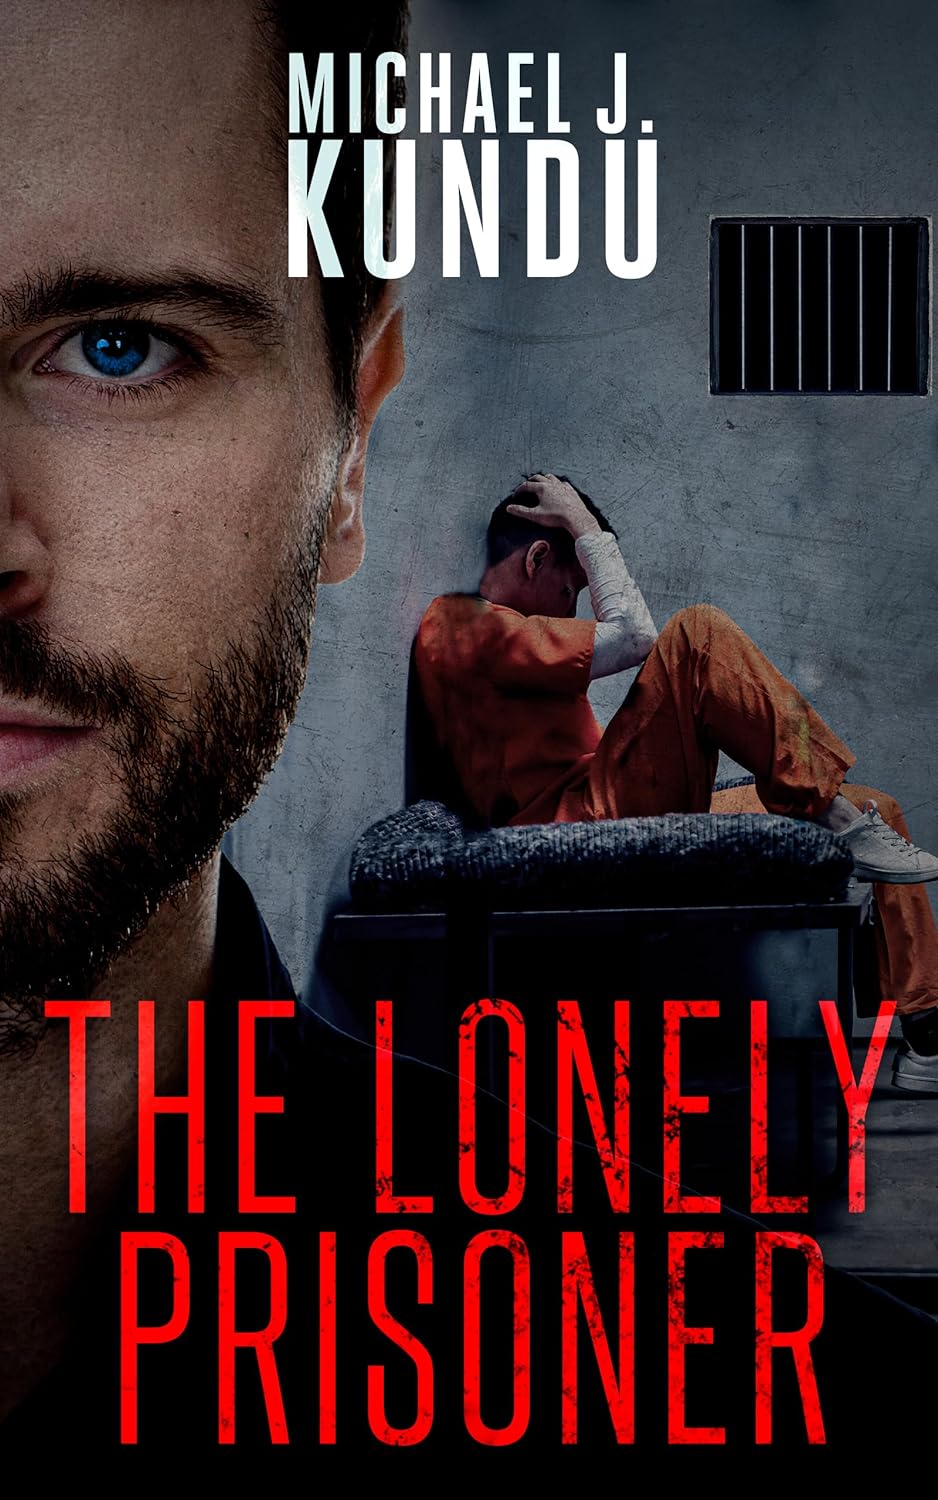 New crime thriller "The Lonely Prisoner" by Michael J. Kundu is released, the twisting tale of a wrongfully convicted man’s quest to uncover the truth after 26 years in prison